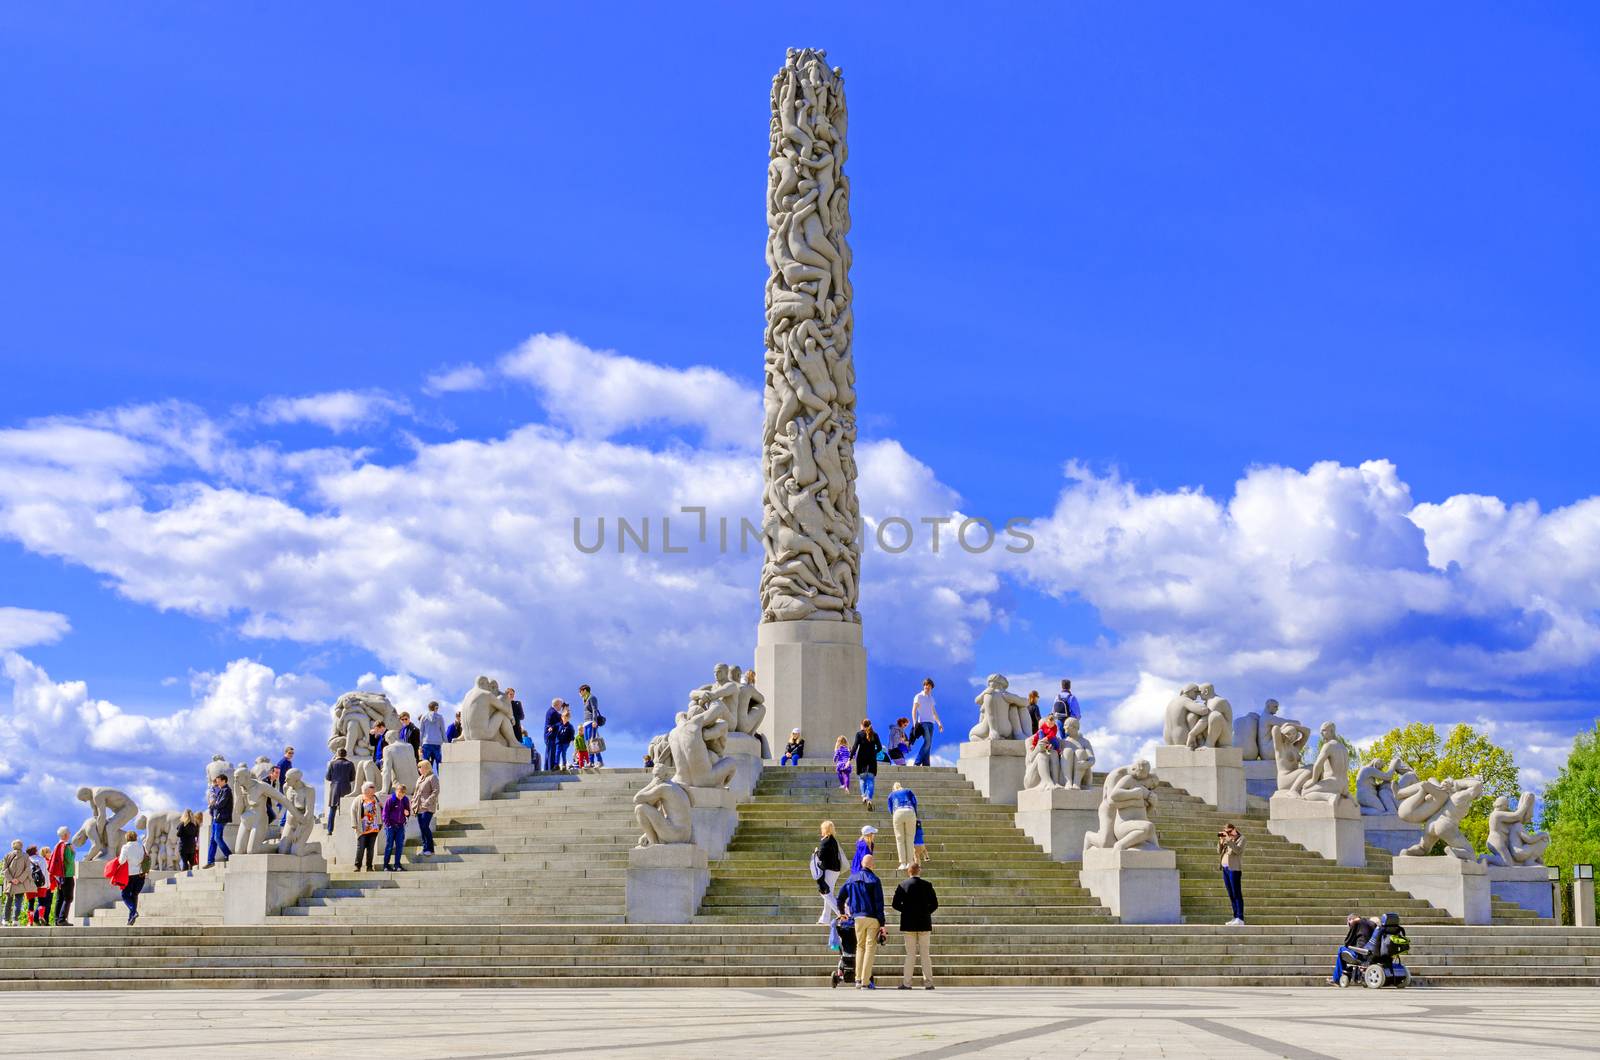 OSLO - MAY 18: Statues in Vigeland park in Oslo, Norway on May 18, 2012. The park covers 80 acres and features 212 bronze and granite sculptures created by Gustav Vigeland.